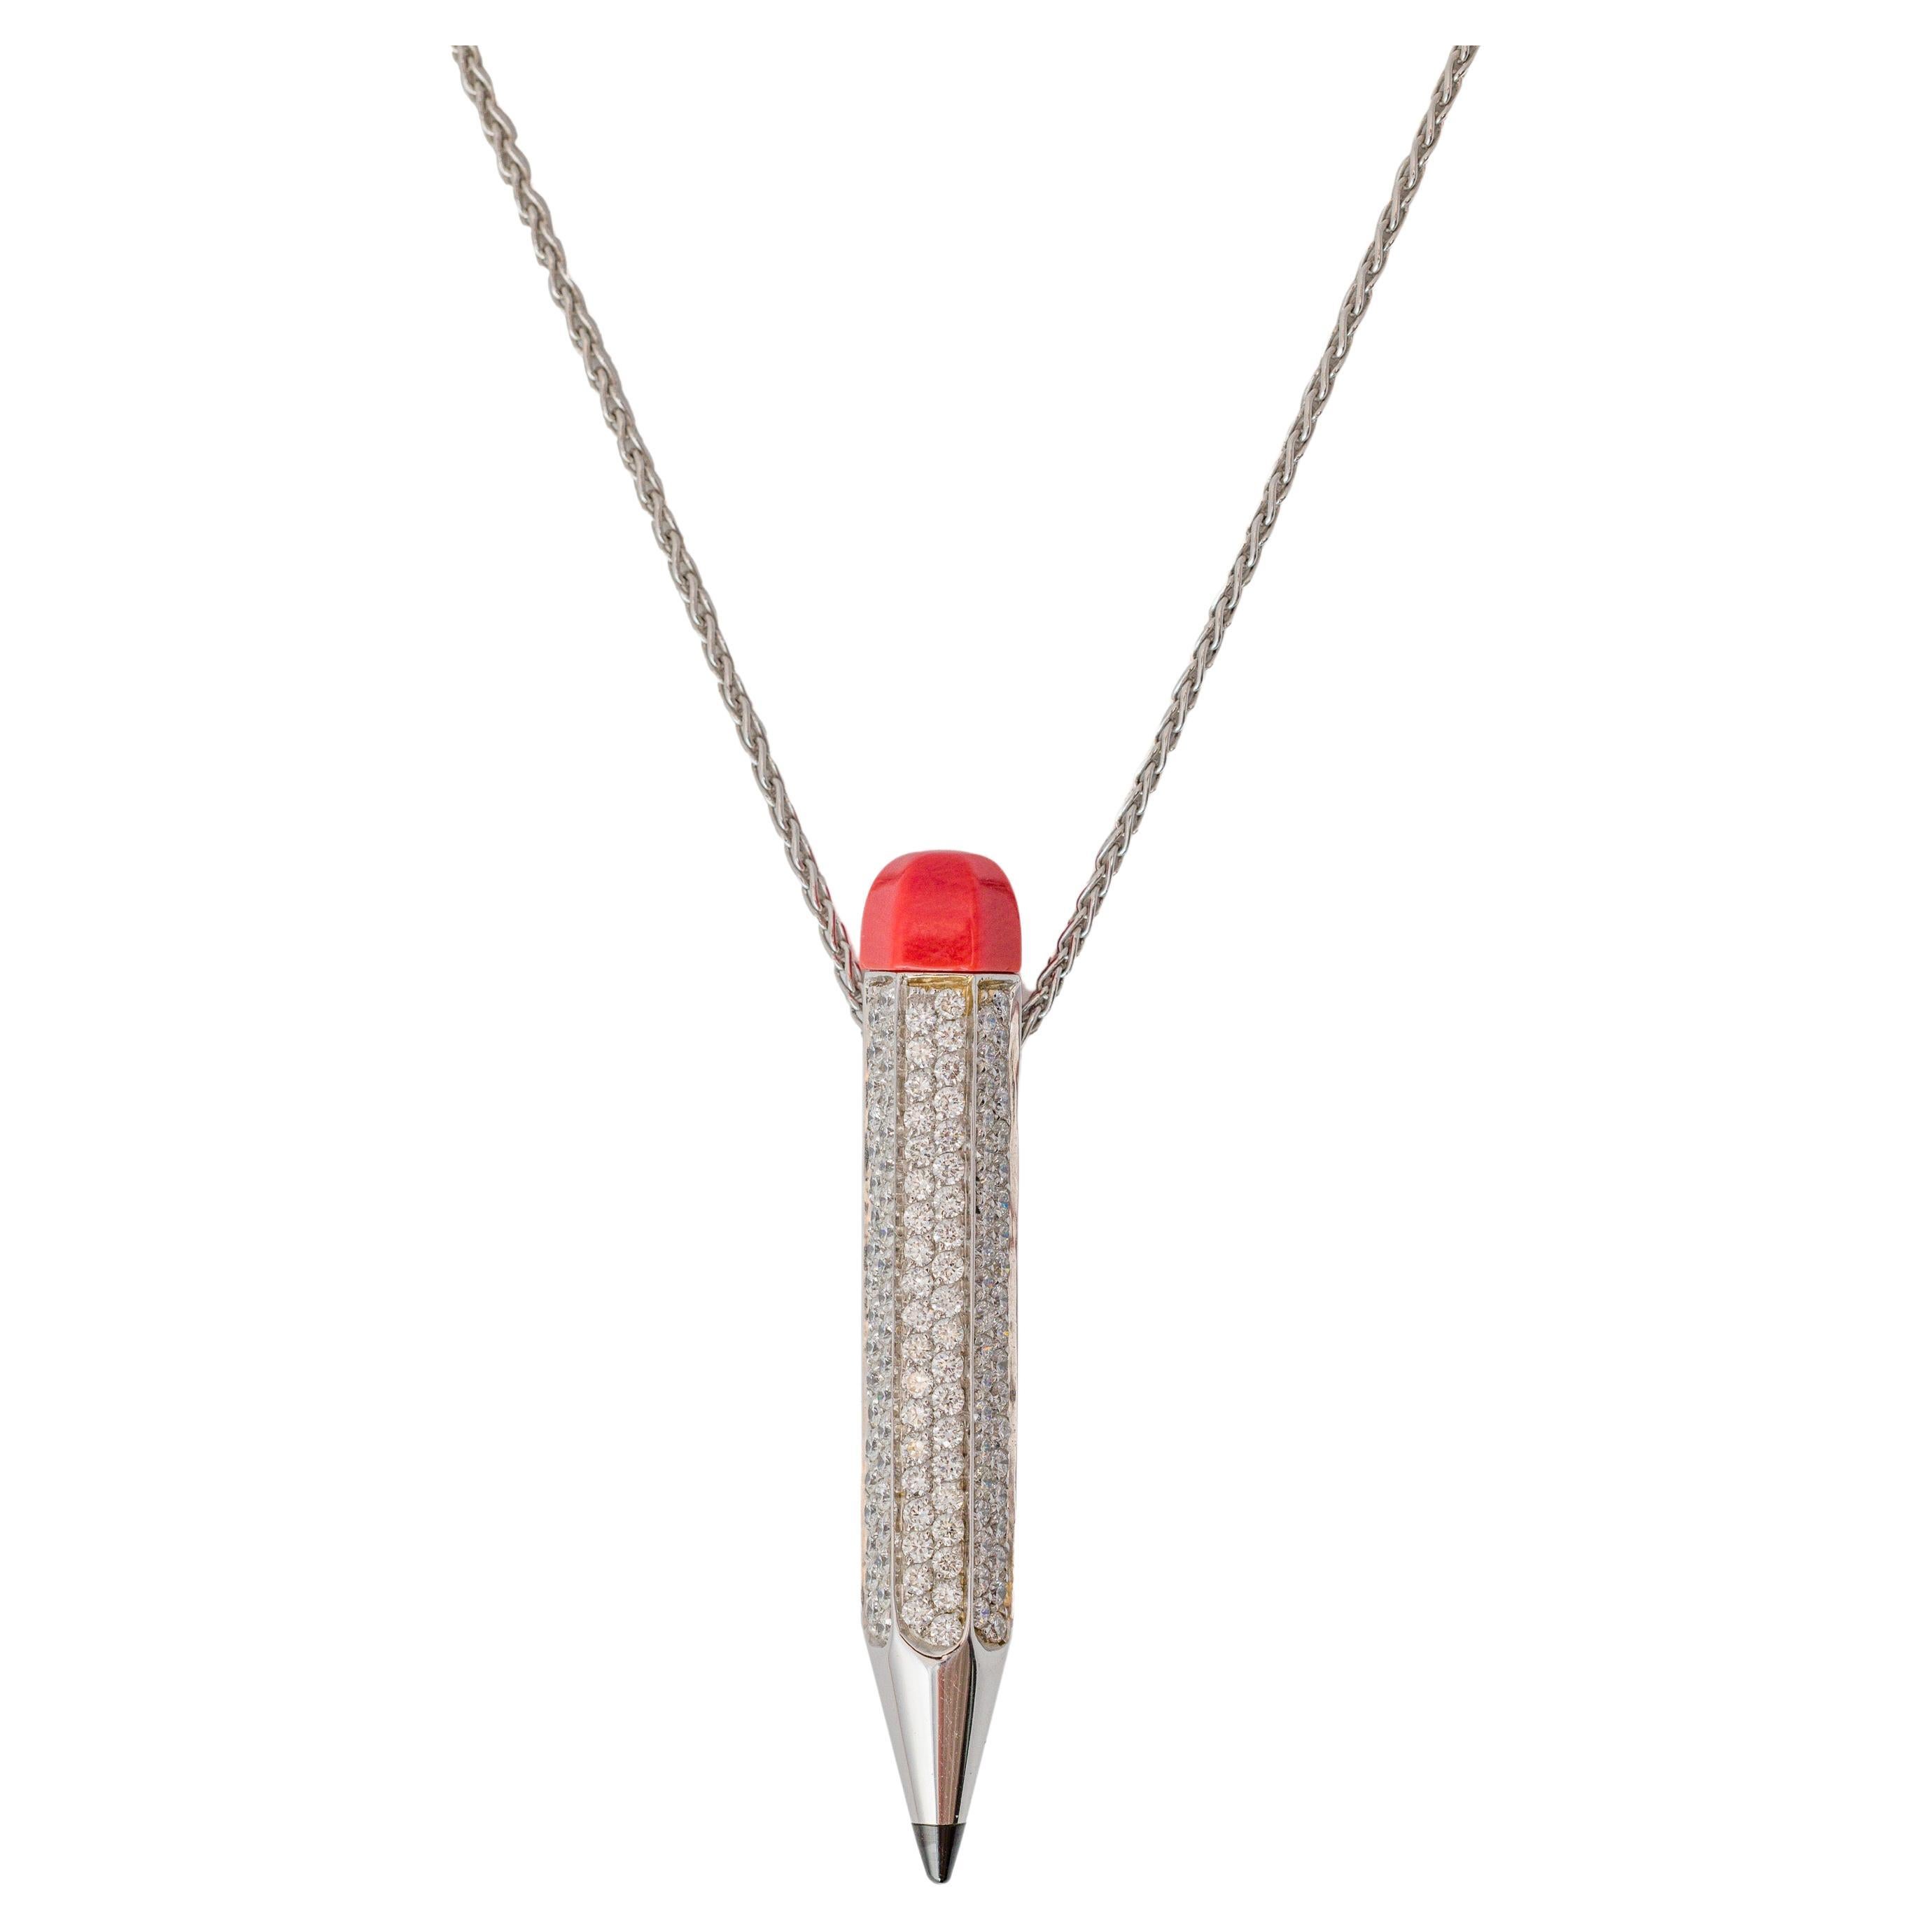 "Costis" Pencil Collection Pendant - Pave' 1.98 cts Diamonds, Ruby Point, Coral 